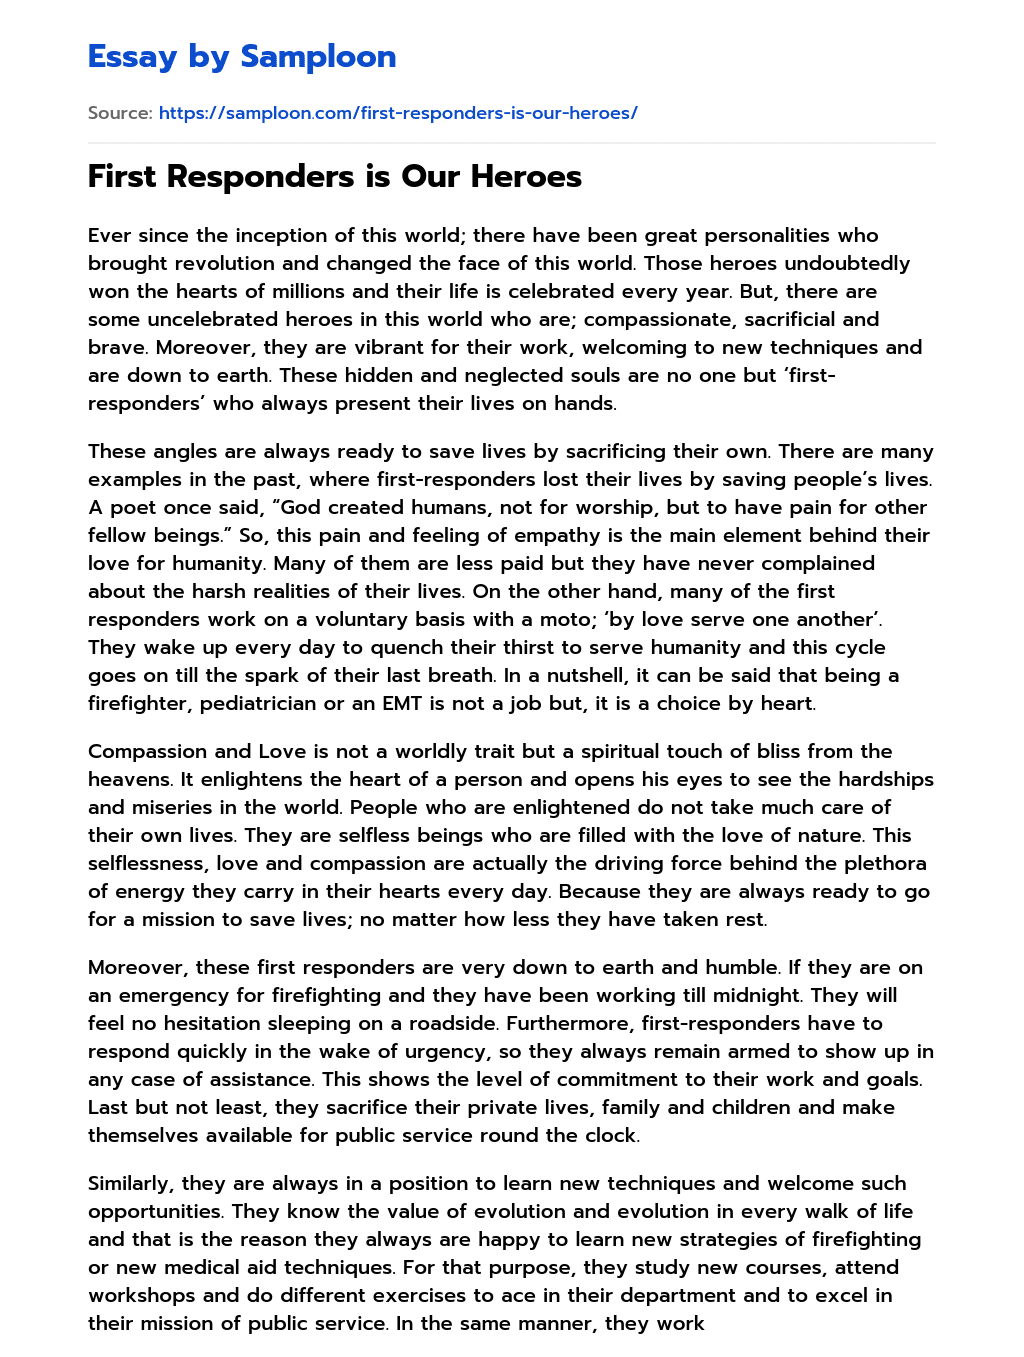 First Responders is Our Heroes essay